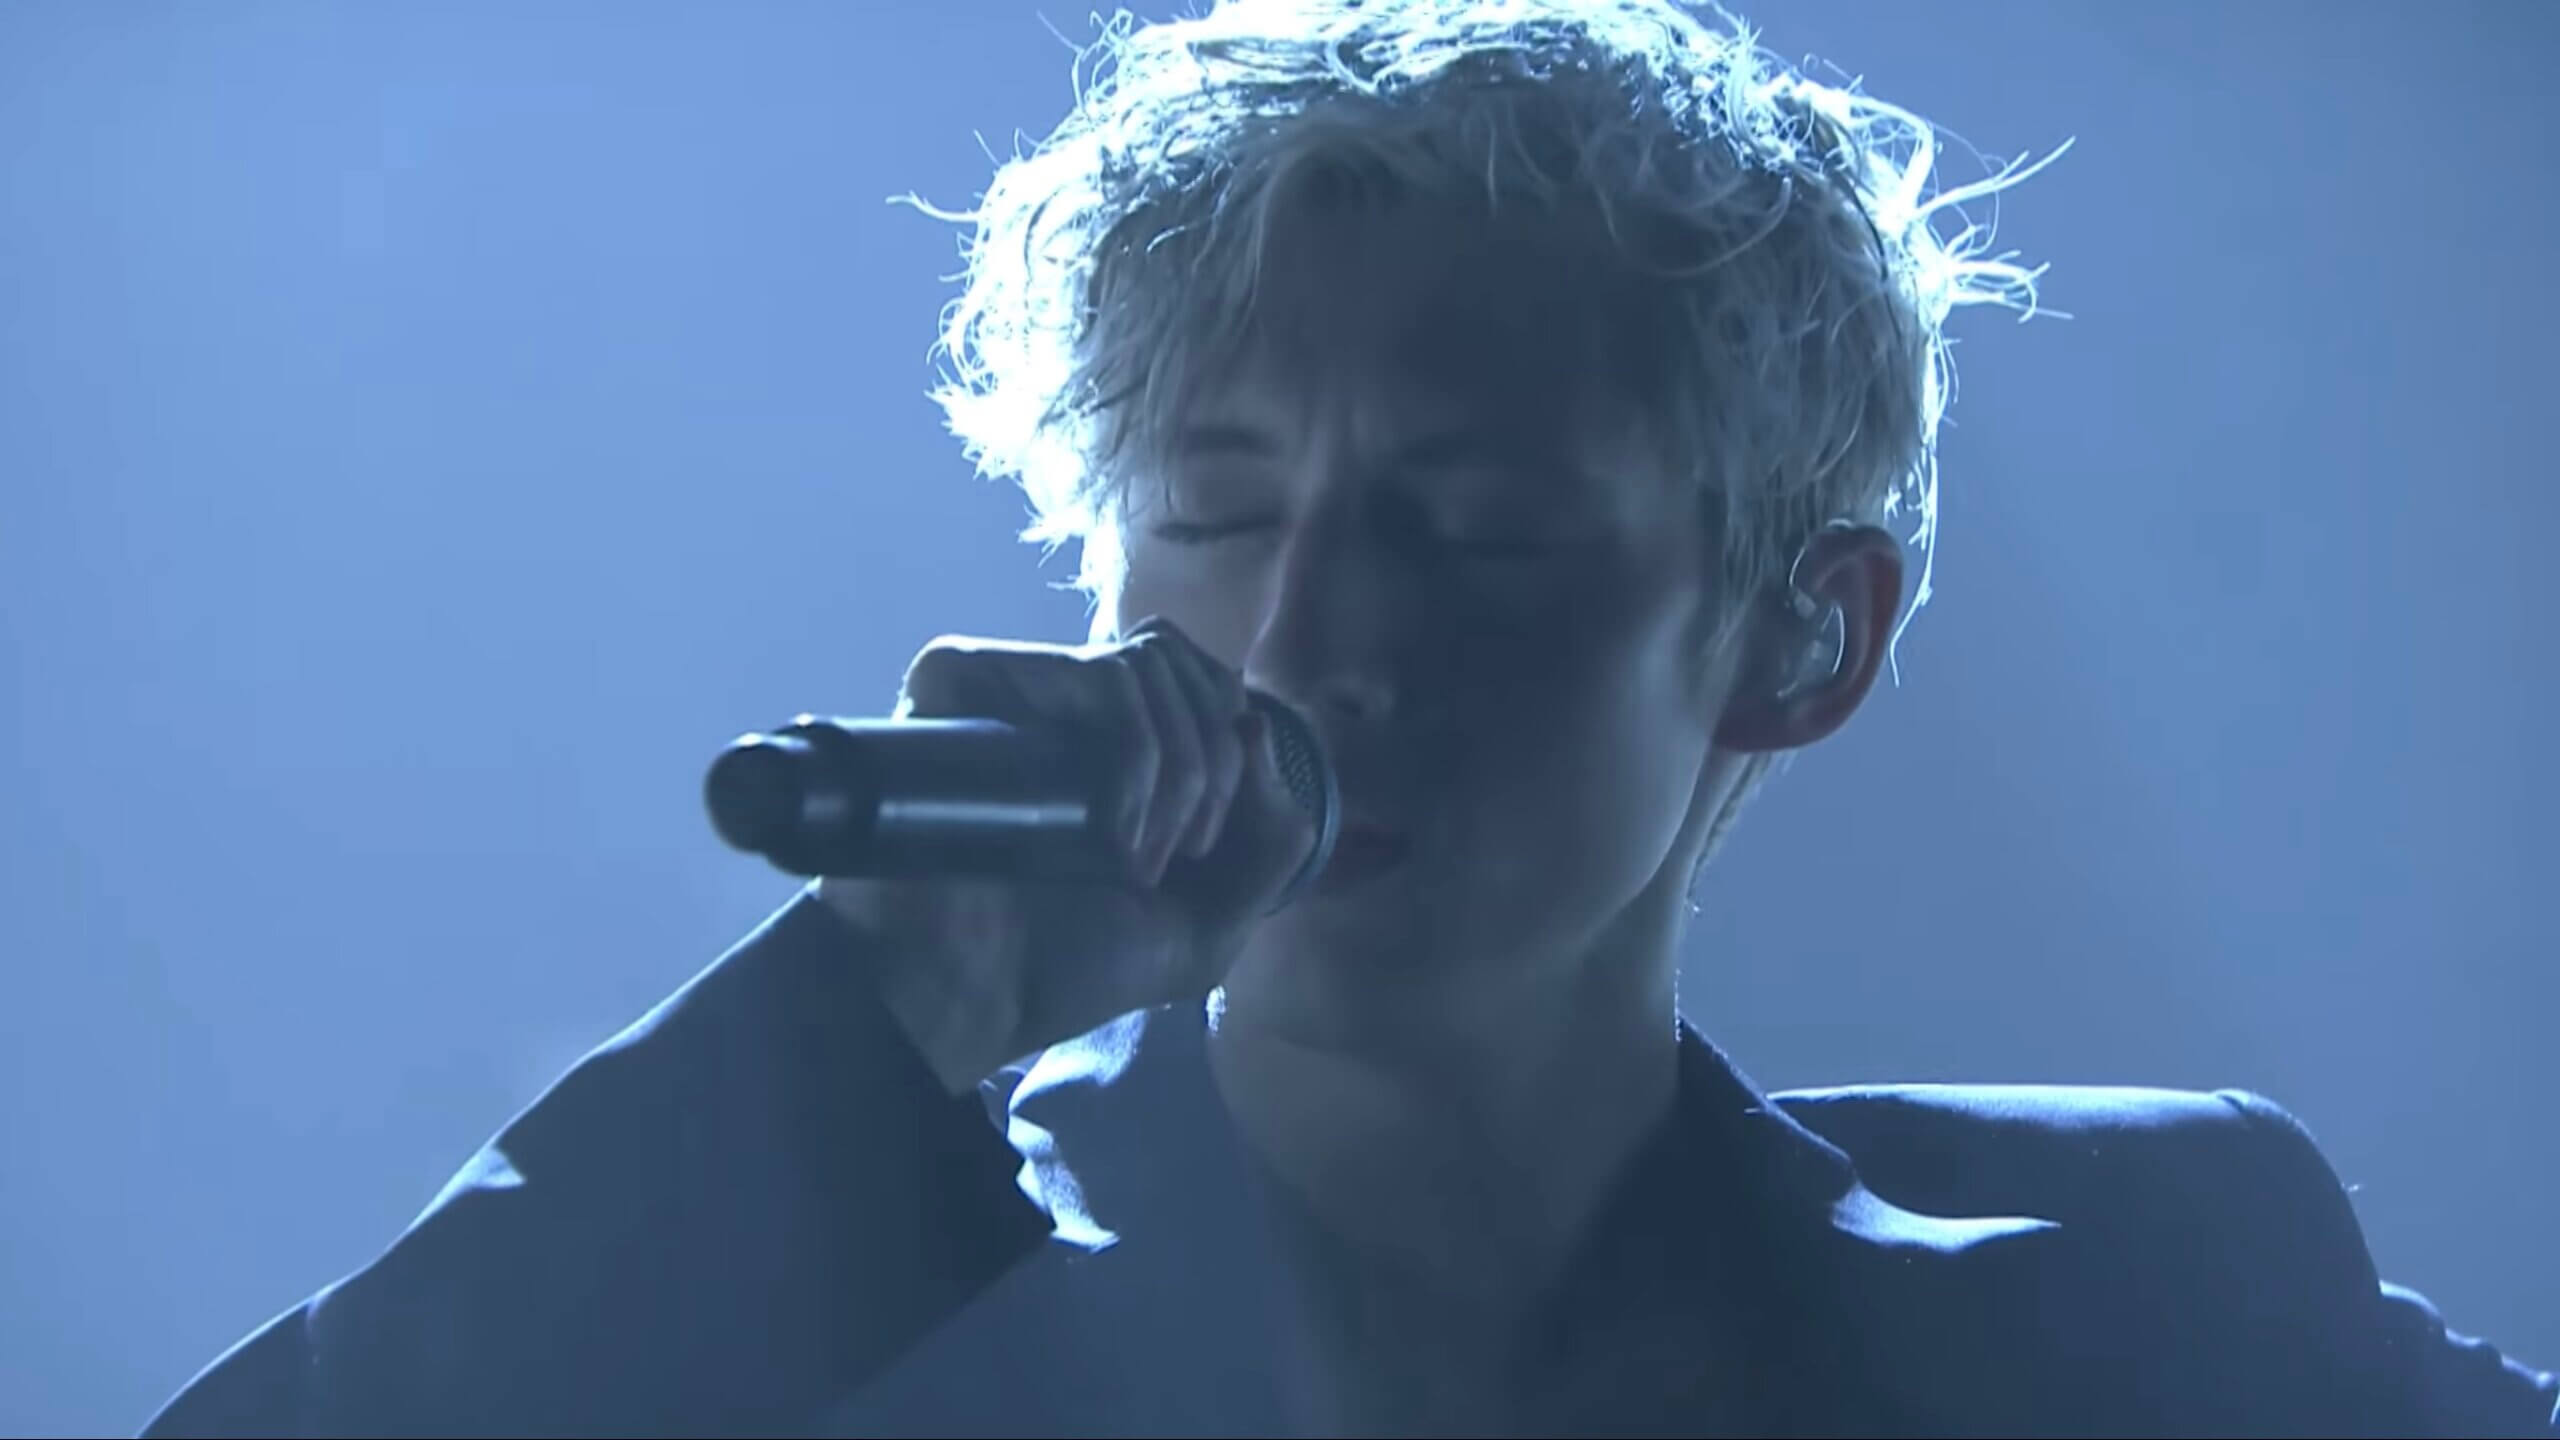 Troye Sivan - My My My! (Live On The Tonight Show Starring Jimmy Fallon) 1